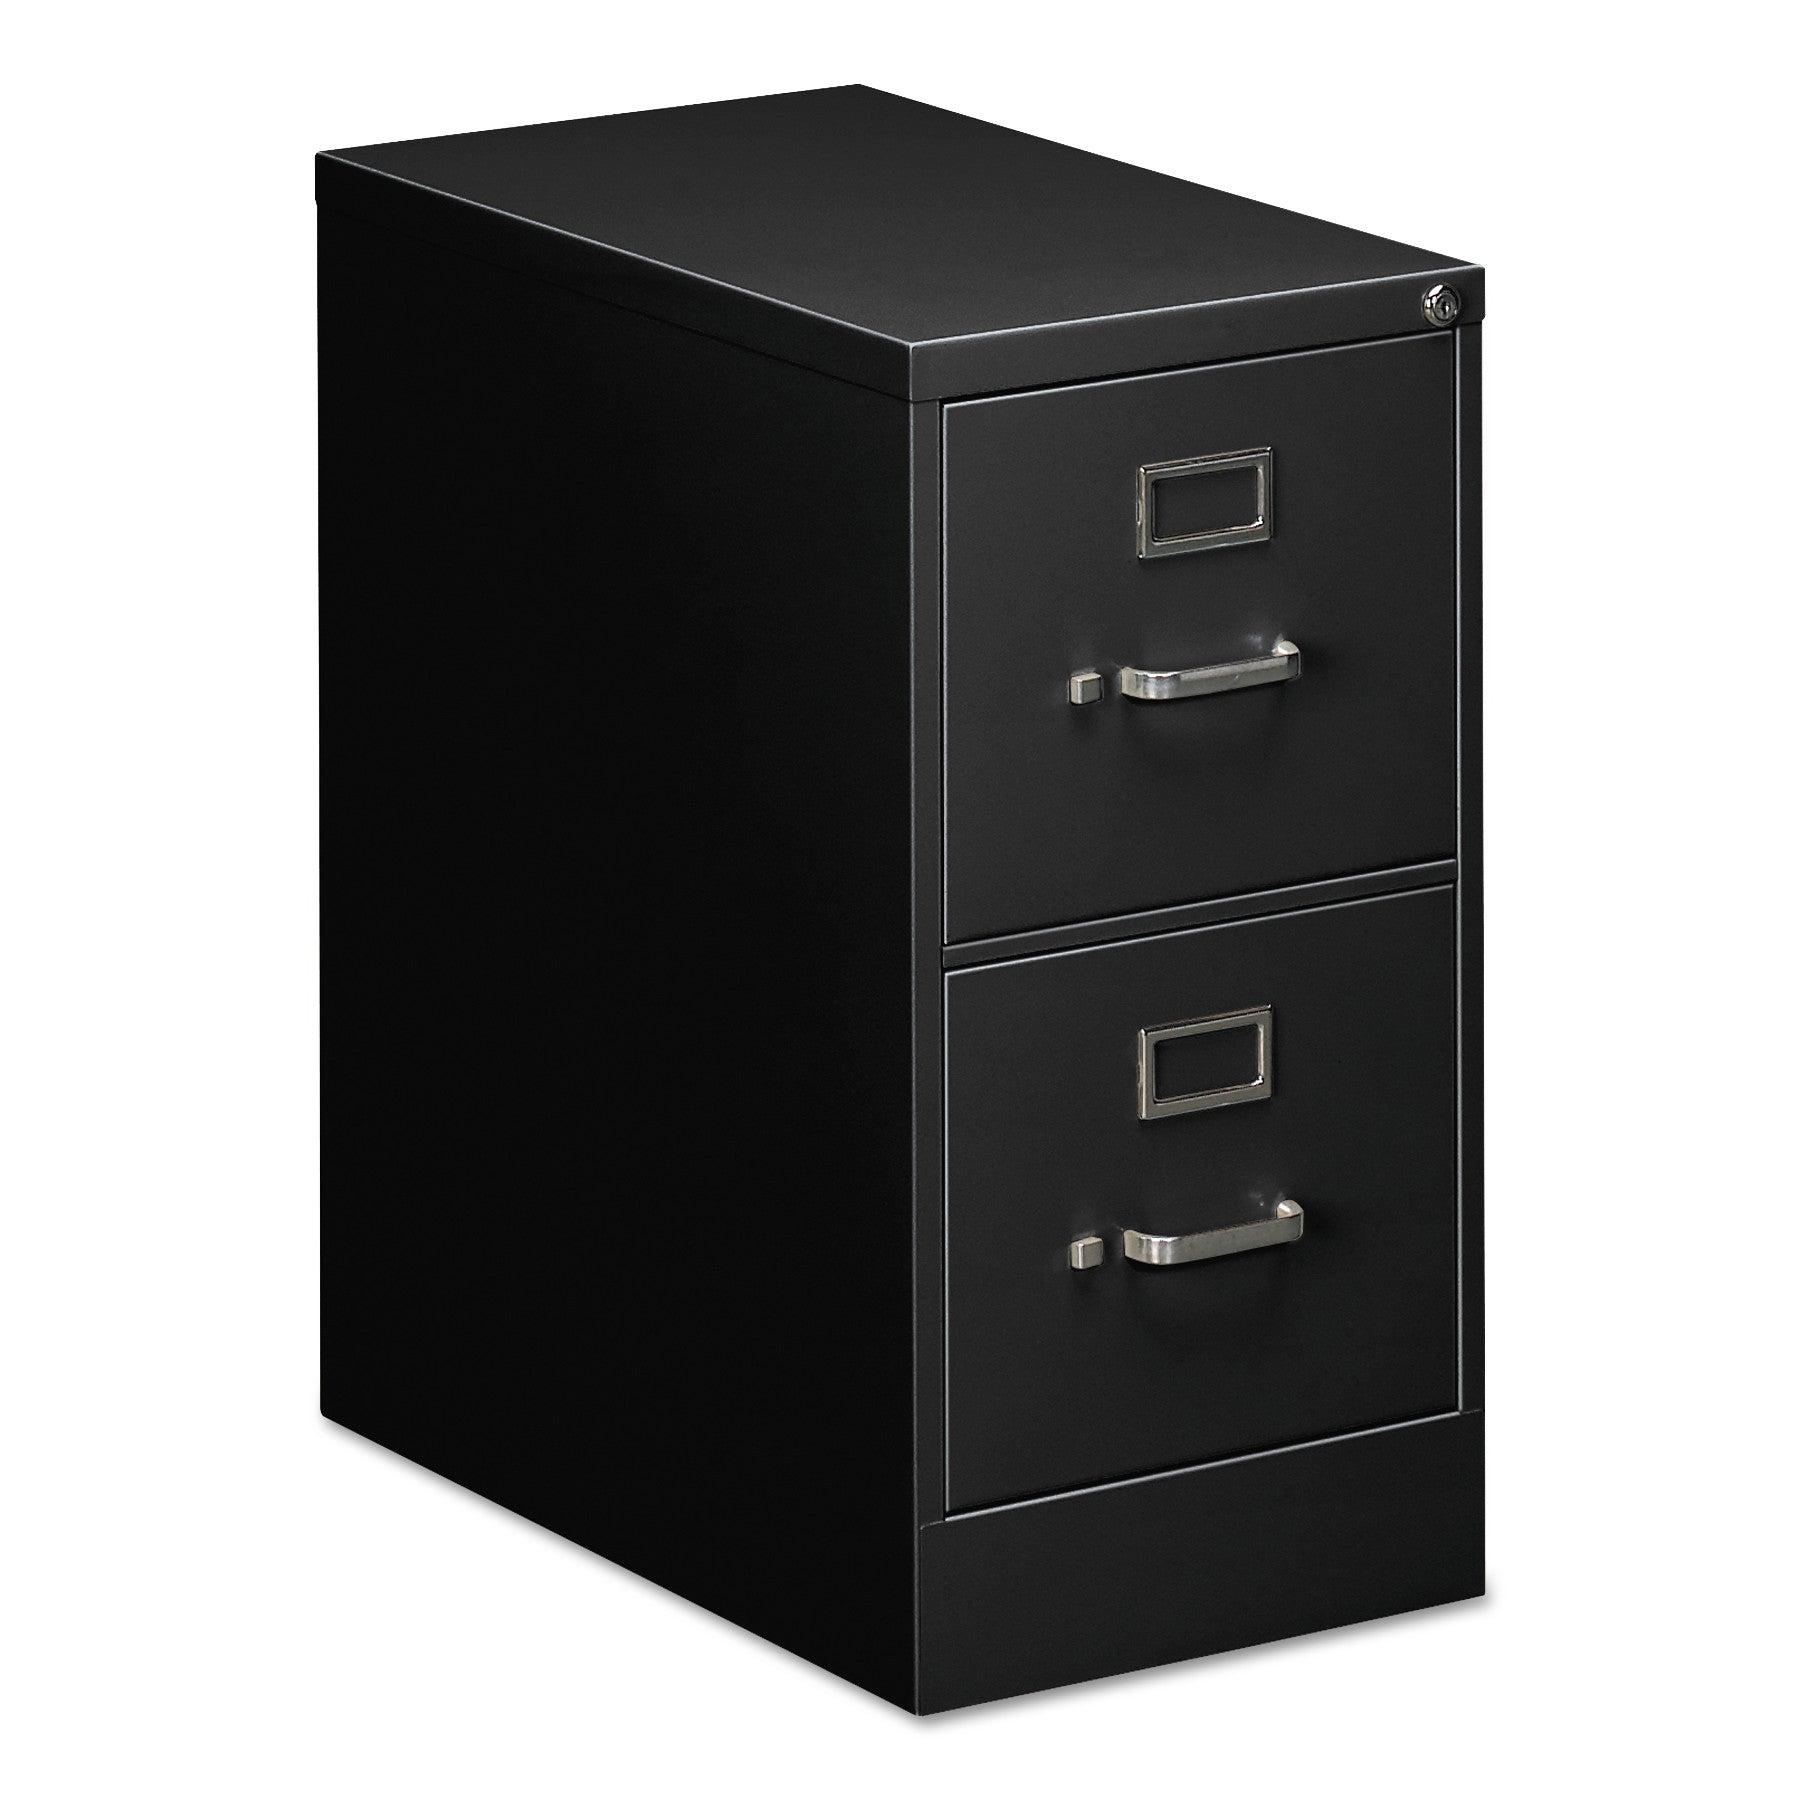 two-drawer-economy-vertical-file-2-letter-size-file-drawers-black-15-x-25-x-2838_alehvf1529bl - 1